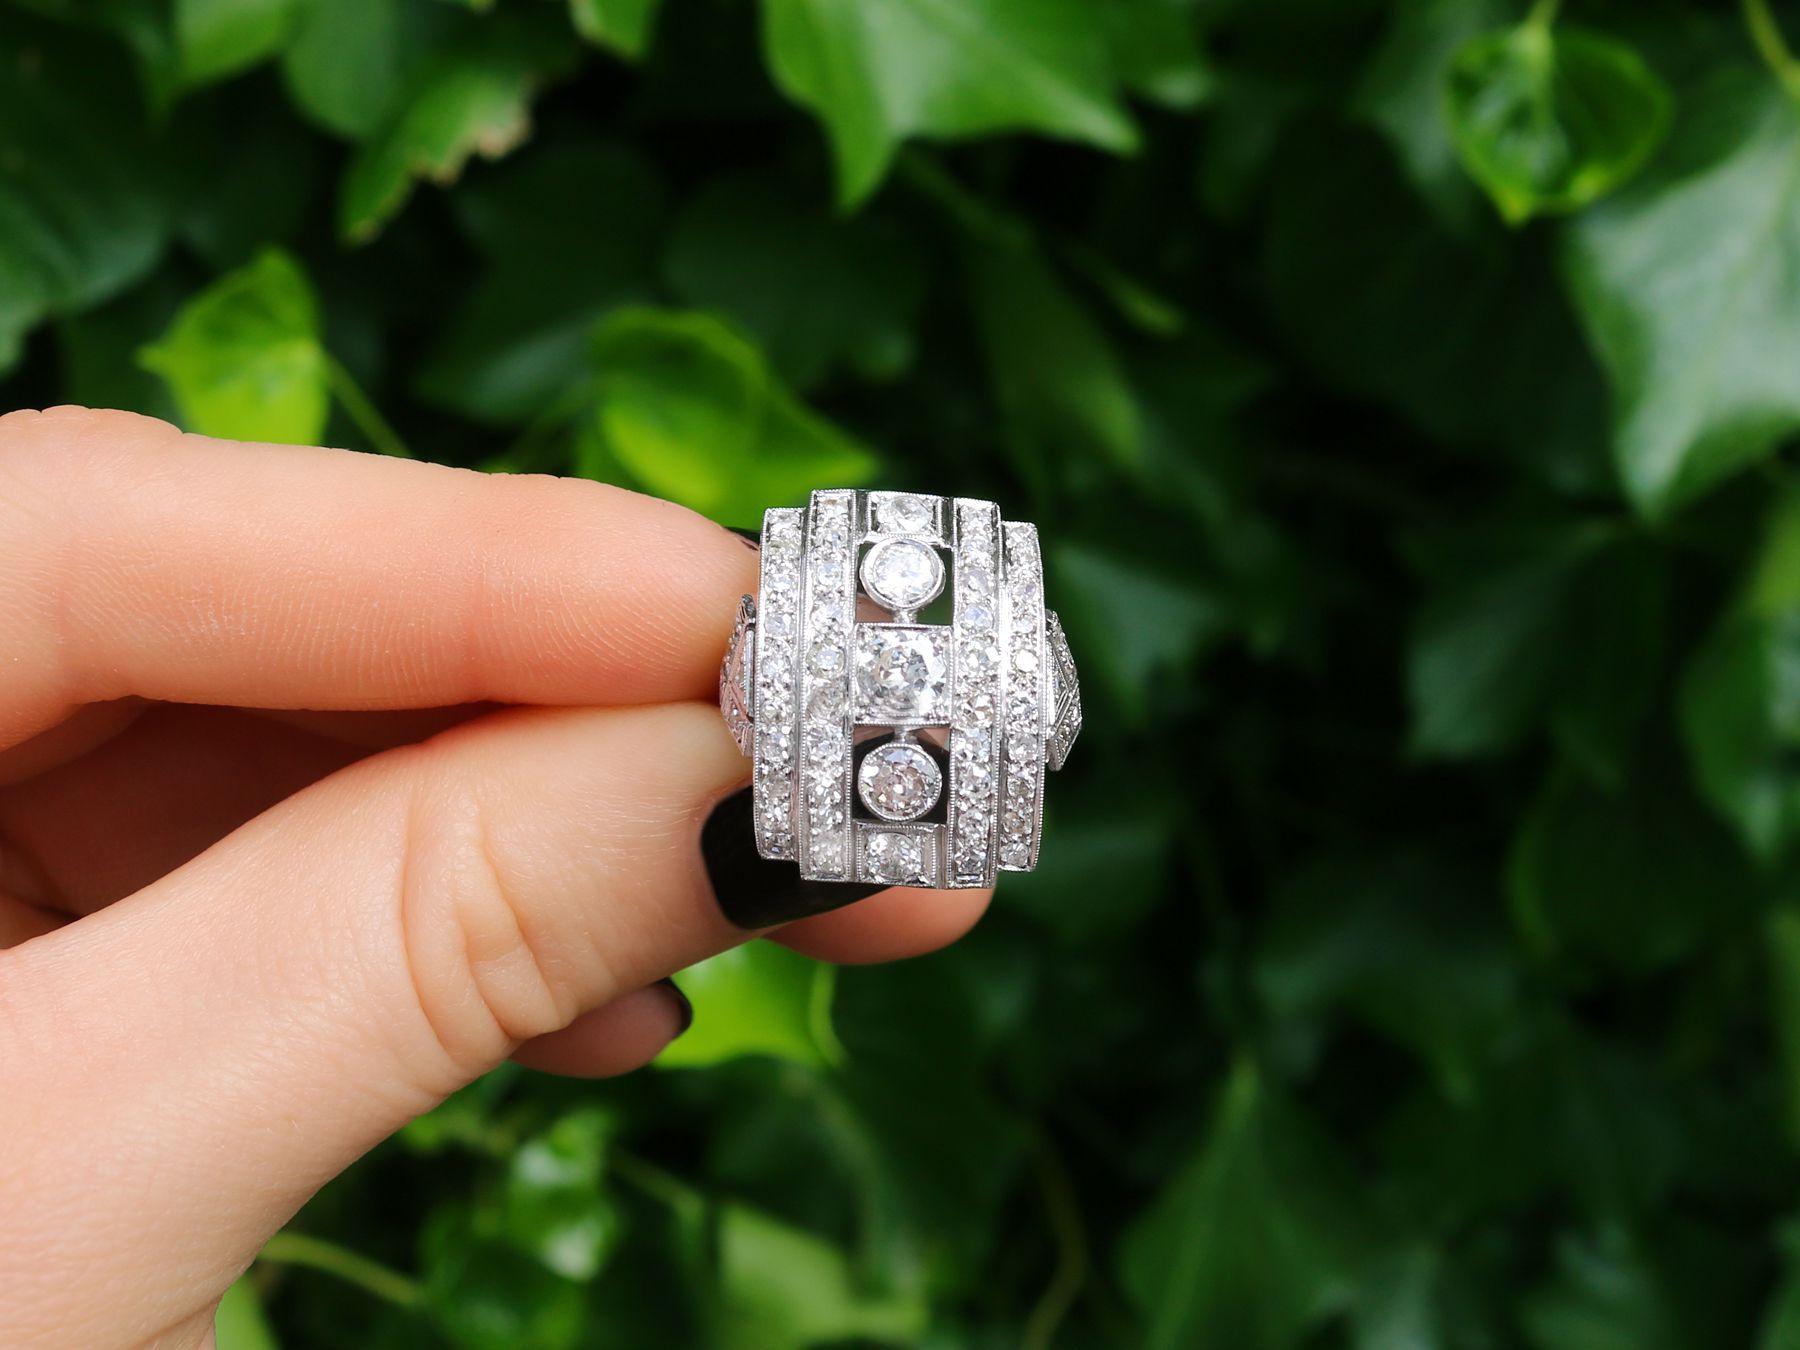 A stunning vintage 1940s Art Deco 2.66 carat diamond and platinum cocktail ring; part of our diverse vintage jewelry and estate jewelry collections.

This stunning, fine and impressive vintage Art Deco diamond ring has been crafted in platinum.

The